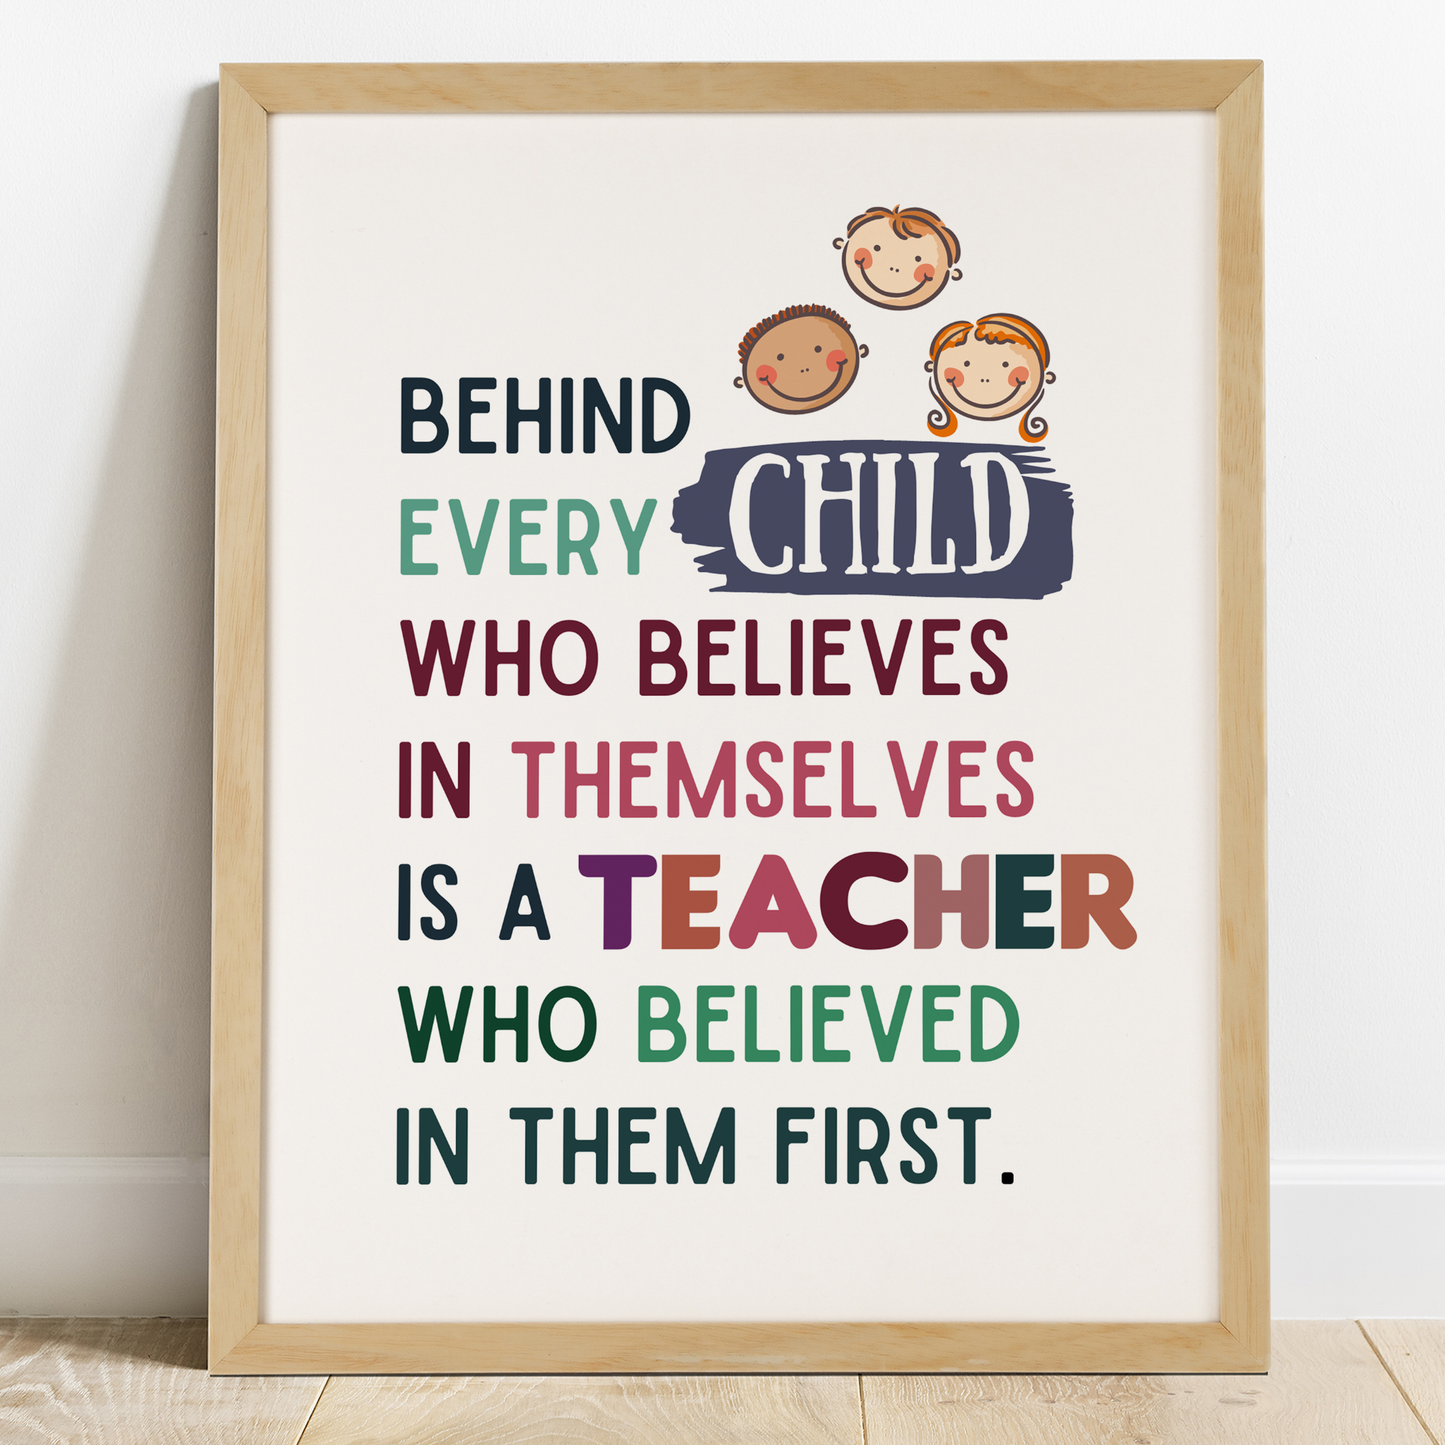 Behind Every Child Who Believes in Themselves is a Teacher Who Believed in Them First